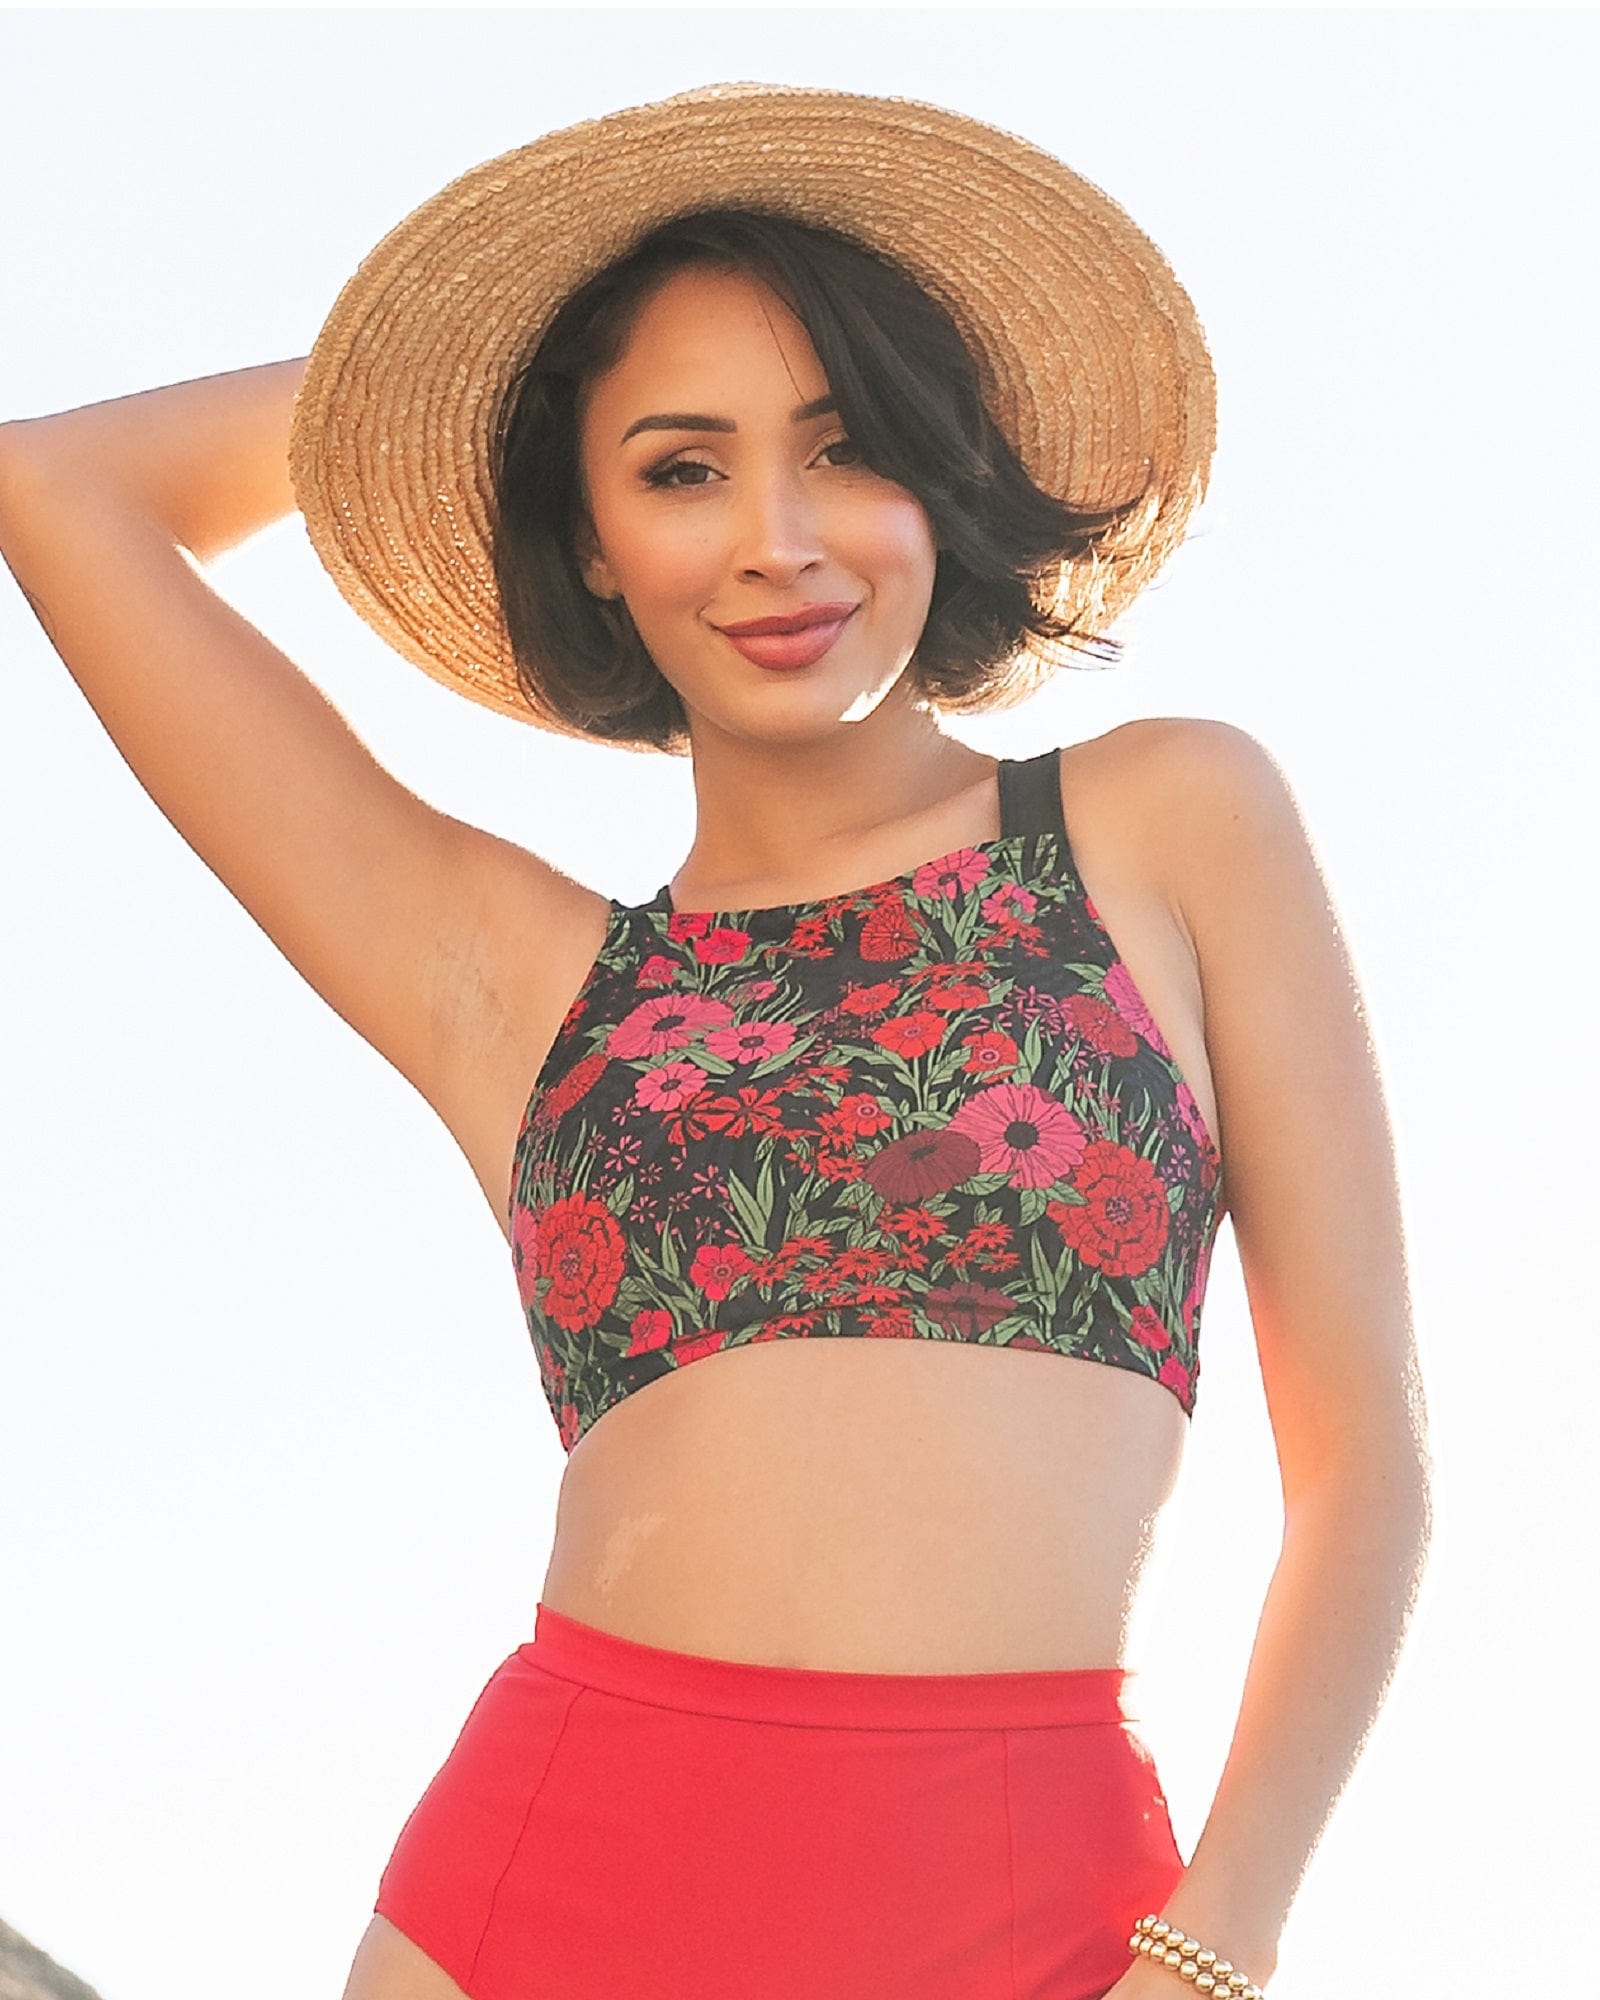 Woman in a two-piece swimsuit with pink and red flowers.